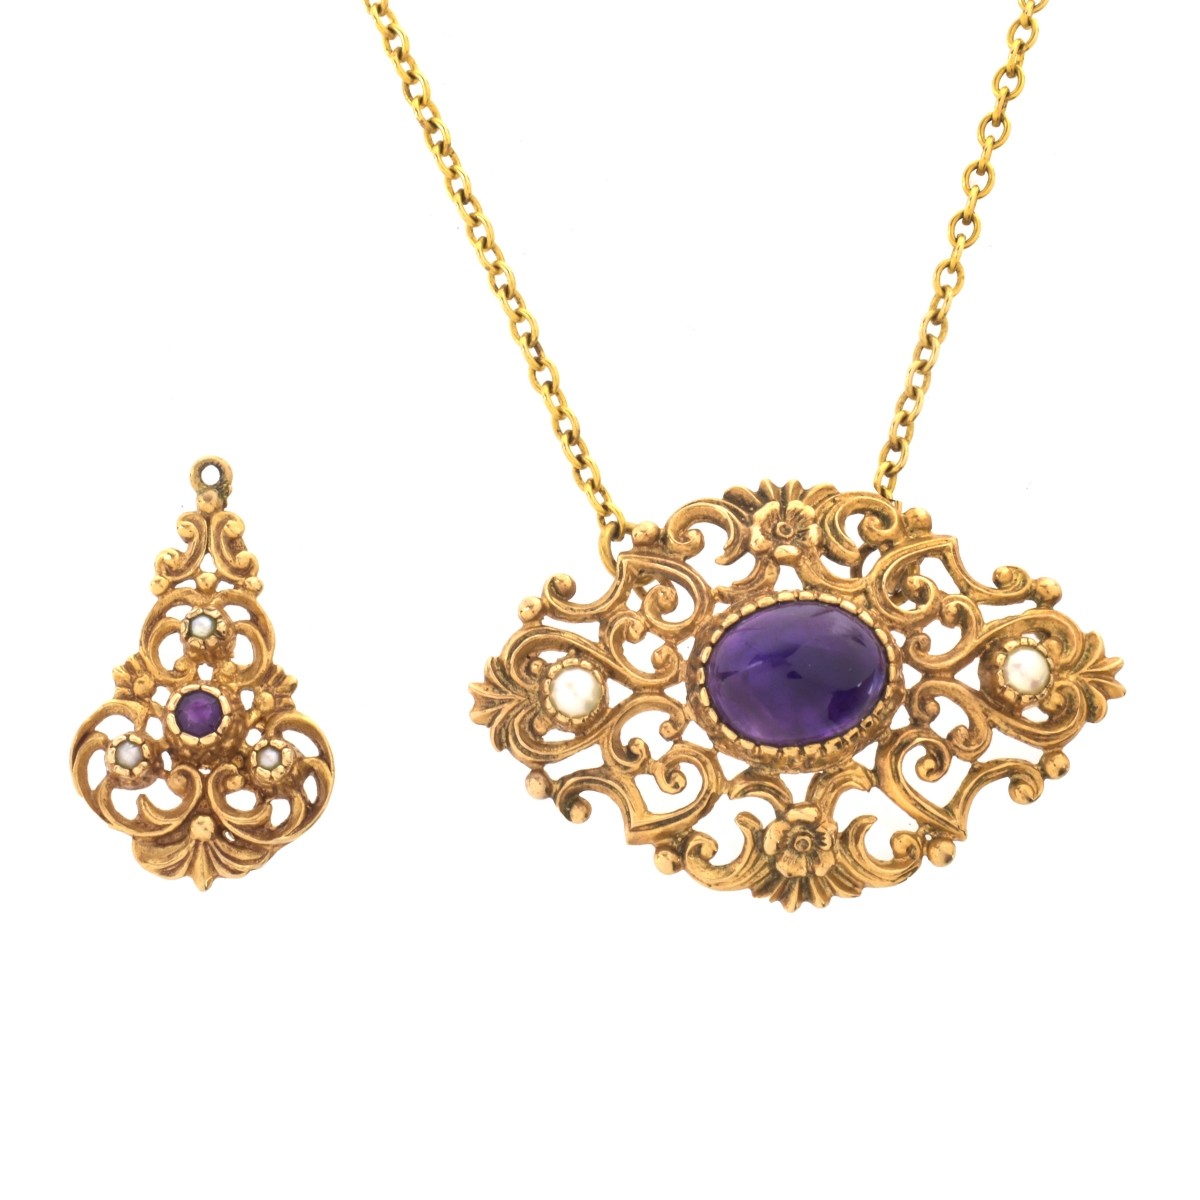 Amethyst, Pearl and 9K Gold Necklace | Kodner Auctions